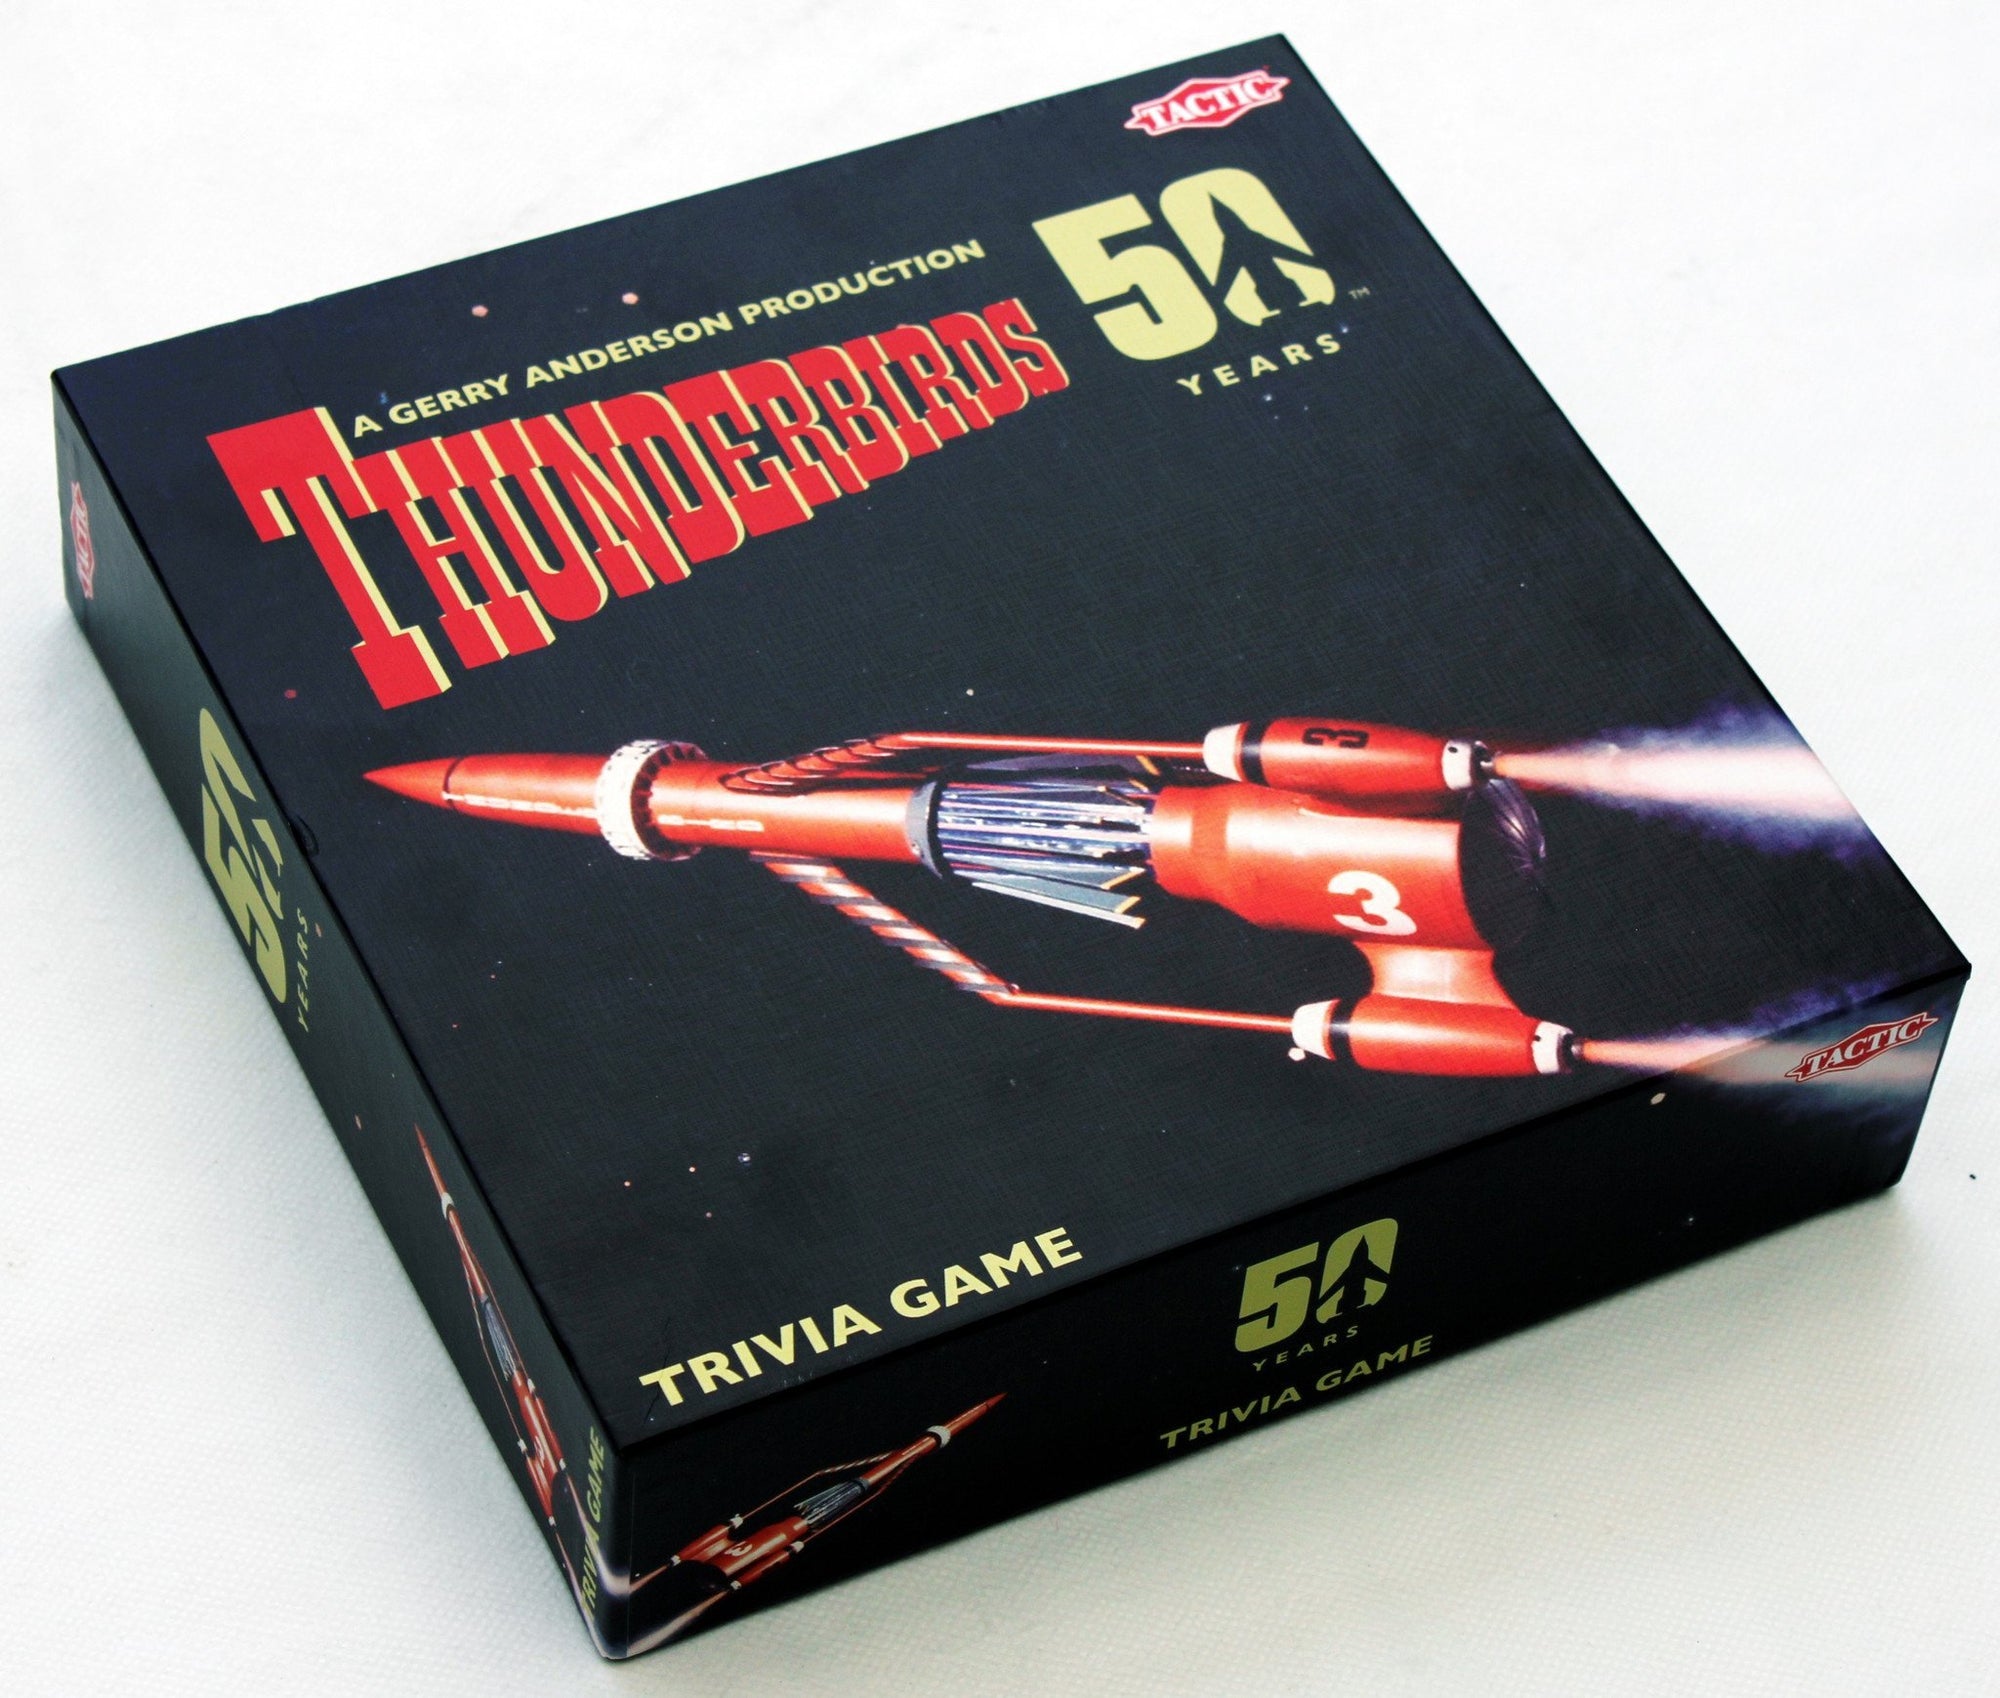 Test yourself with the Thunderbirds Trivia Game! - The Gerry Anderson Store